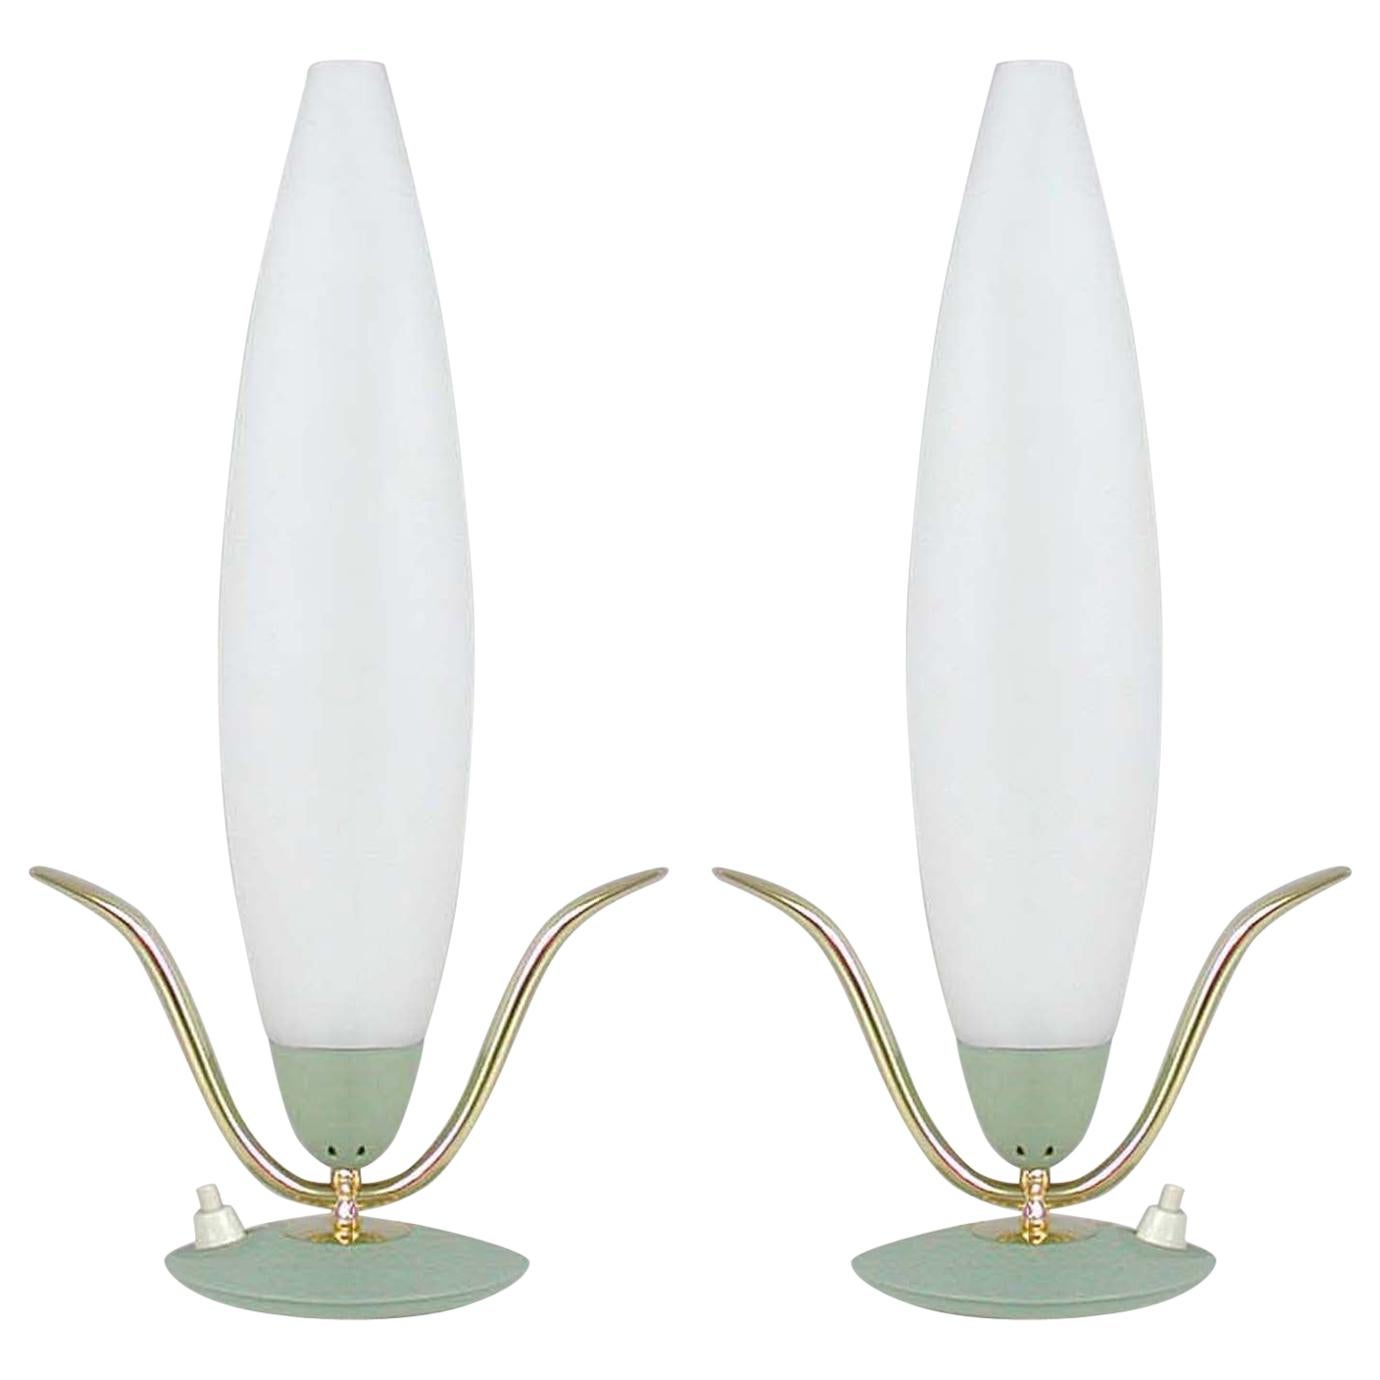 Midcentury Italian Sputnik Mint and Satinated Glass Table Lamps, 1950s, Set of 2 For Sale